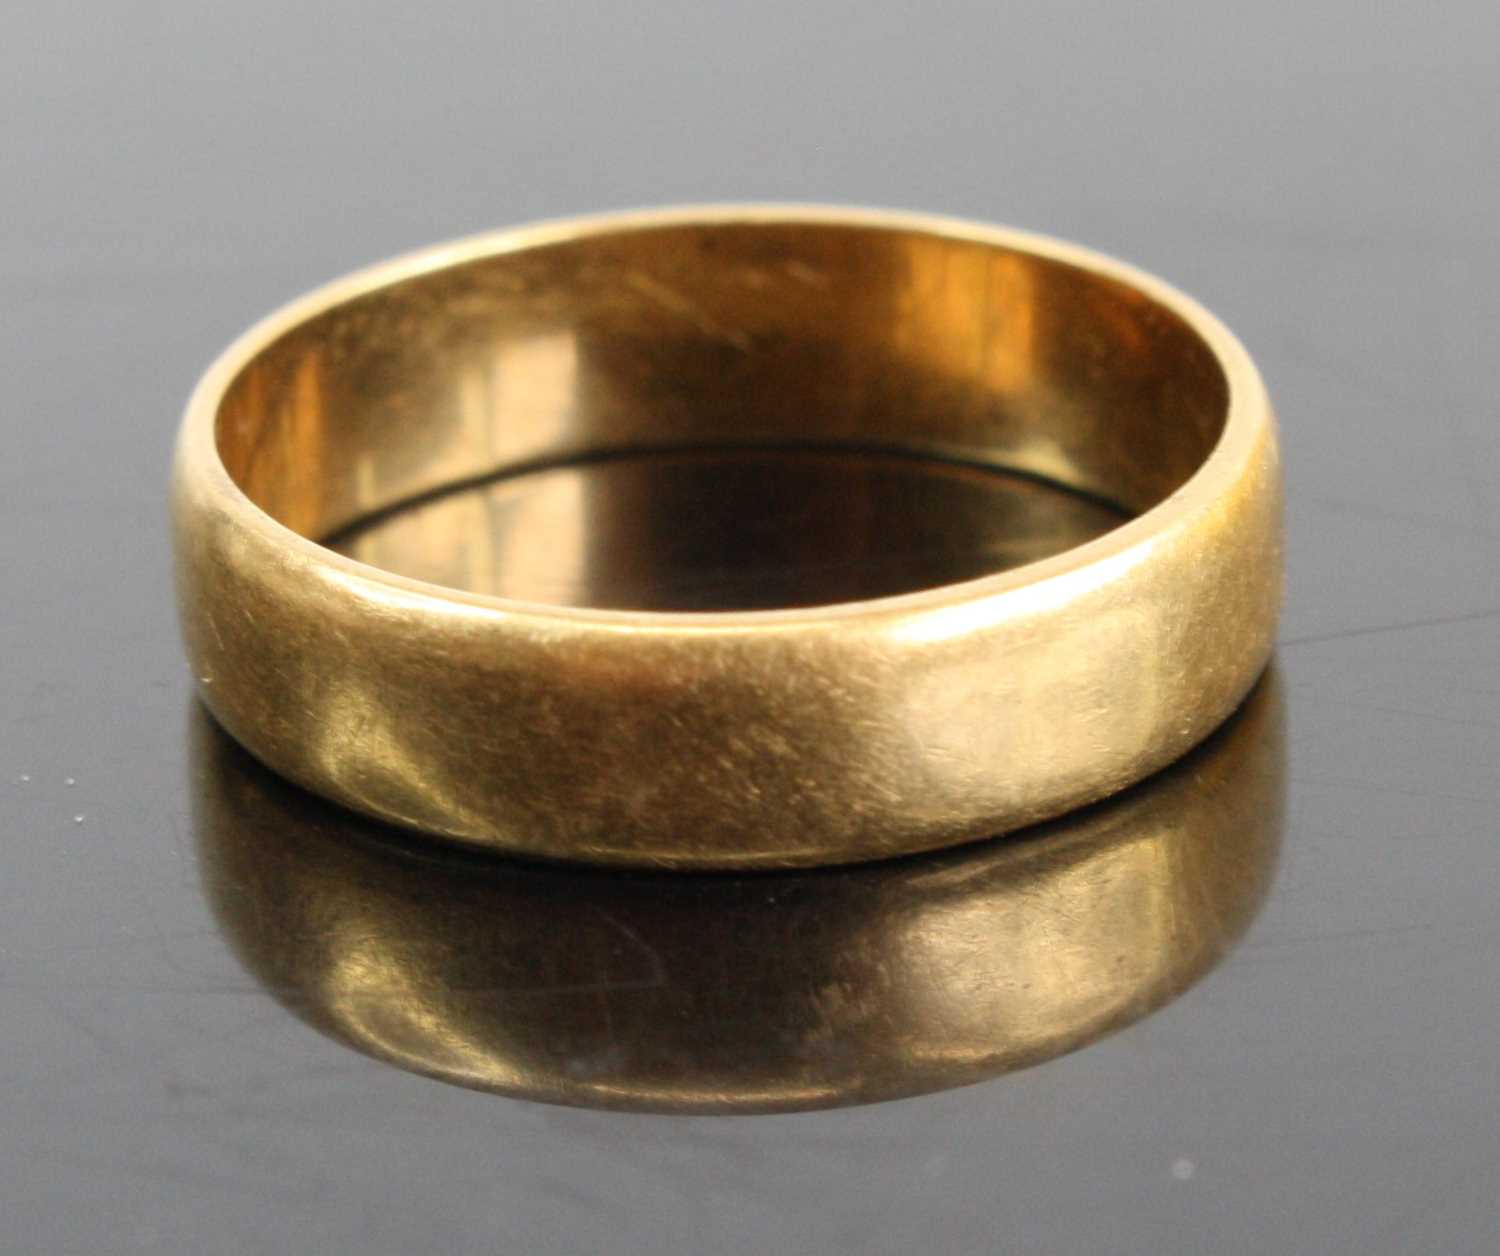 An 18ct gold wedding band, sponsor PP&P, London 1958, 3.2g, size M/N - Image 2 of 2